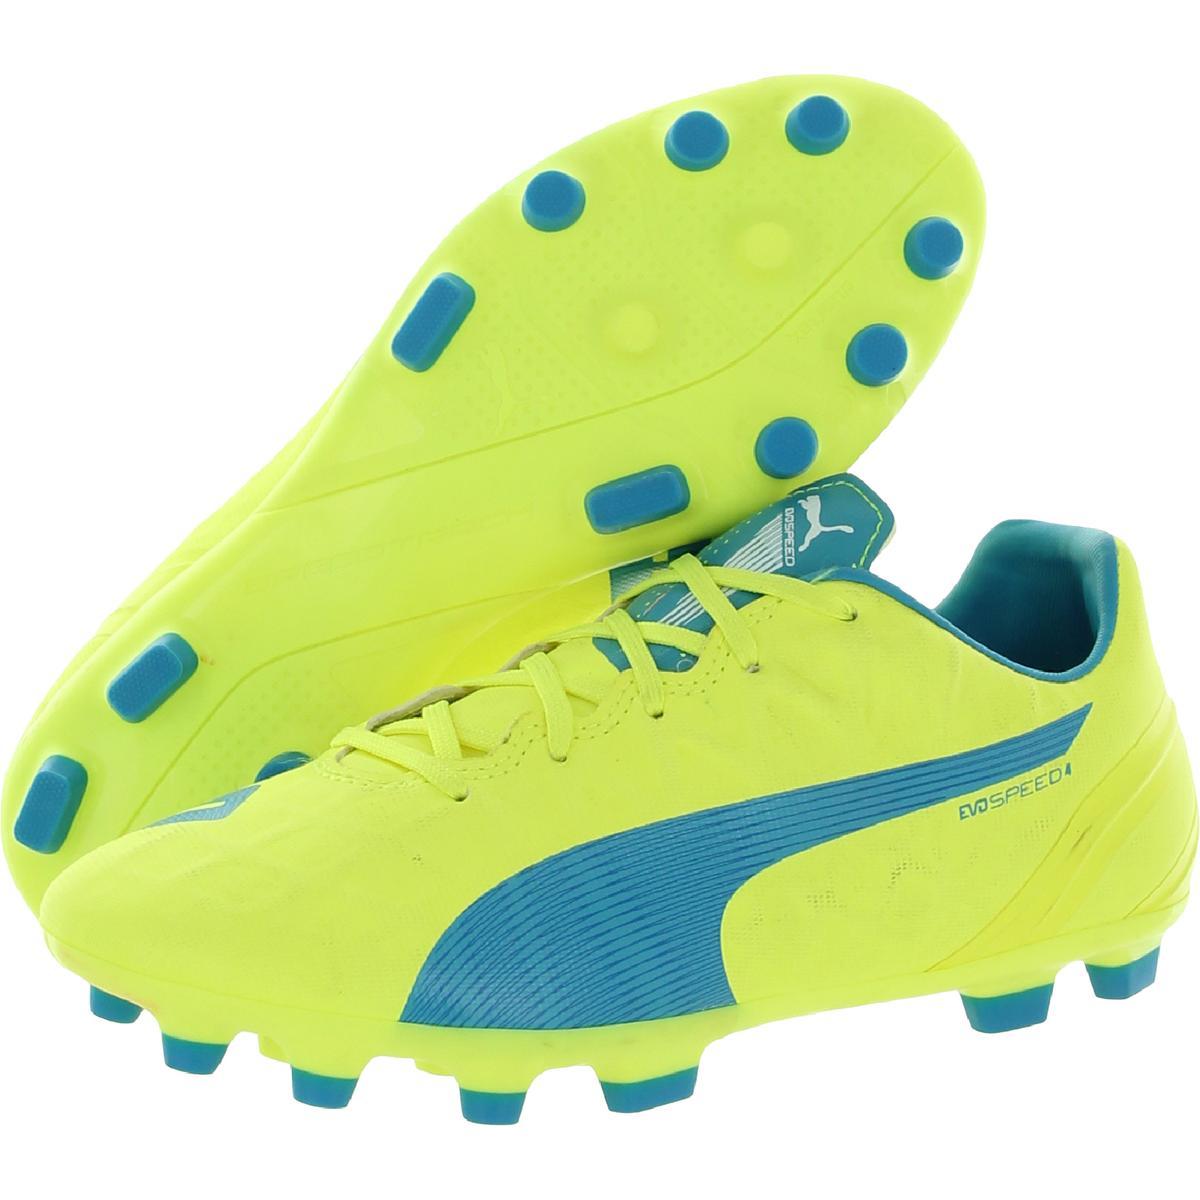 PUMA Evospeed 4 Low Top Football Cleats in for Lyst